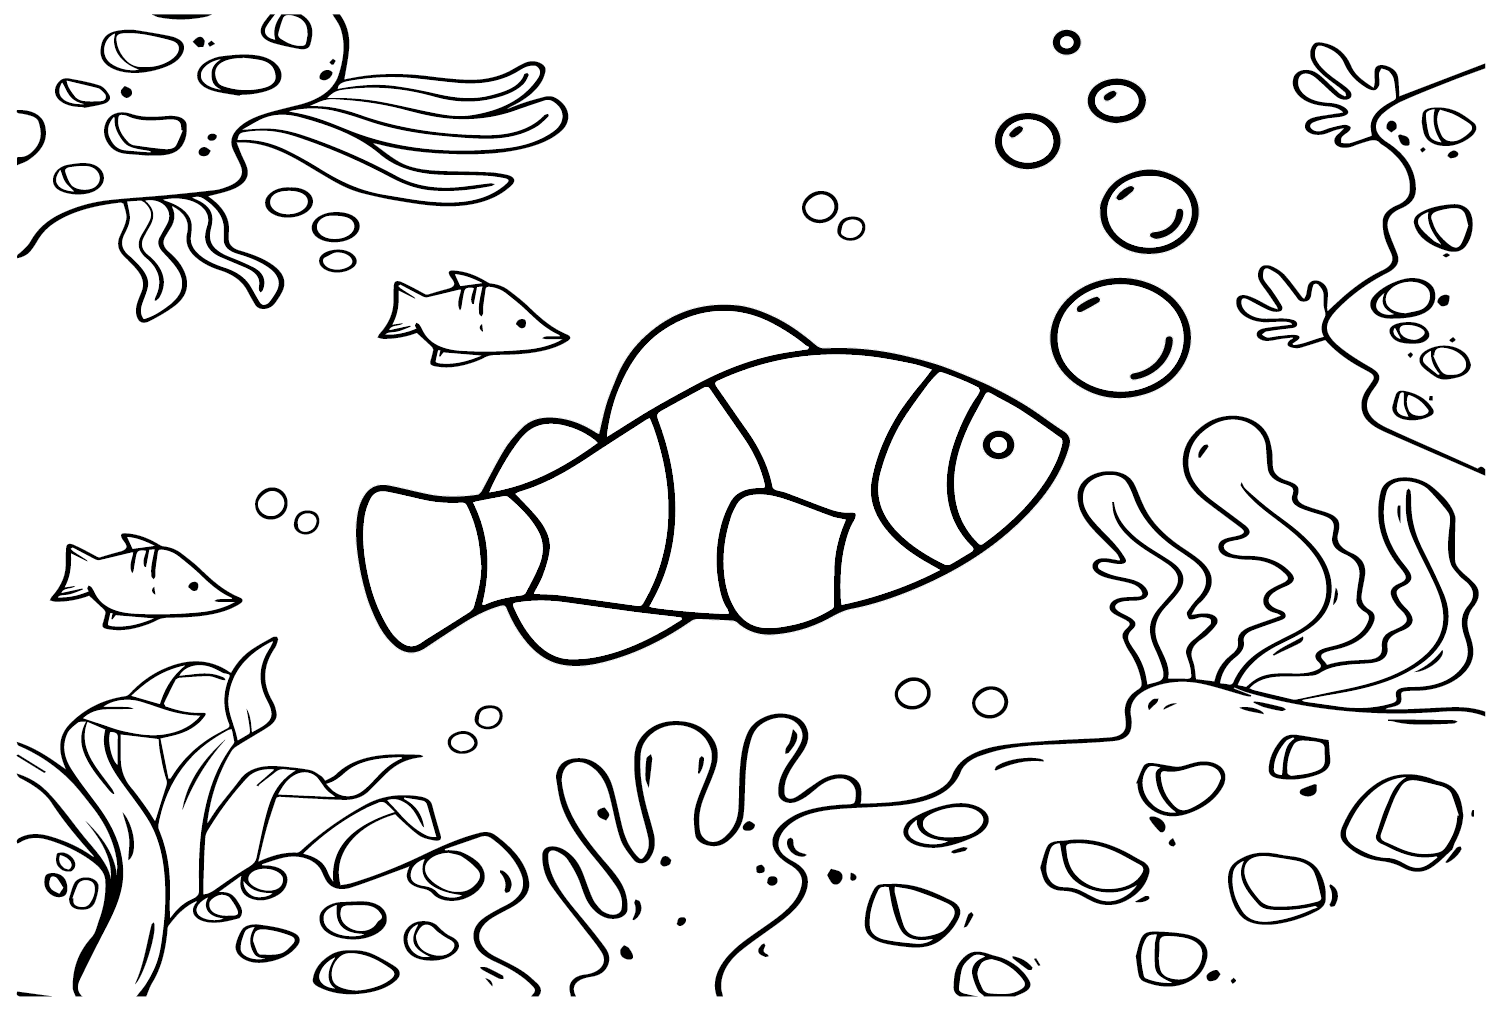 Clownfish Suitable for Children’s Coloring Pages